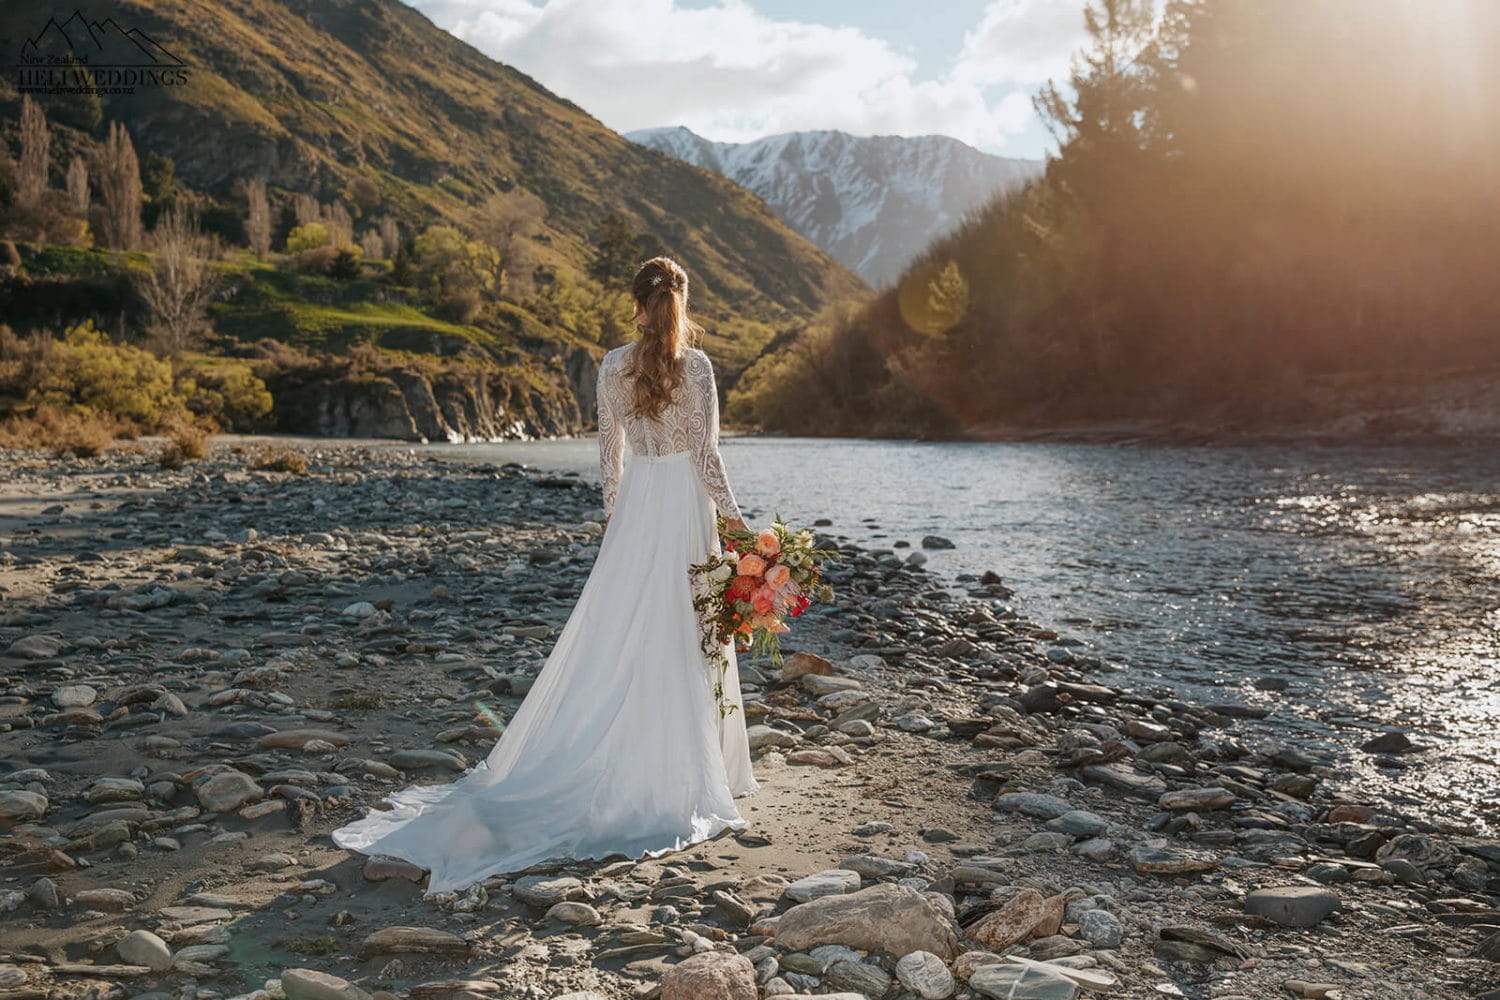 Queenstown destination wedding by the river at sunset